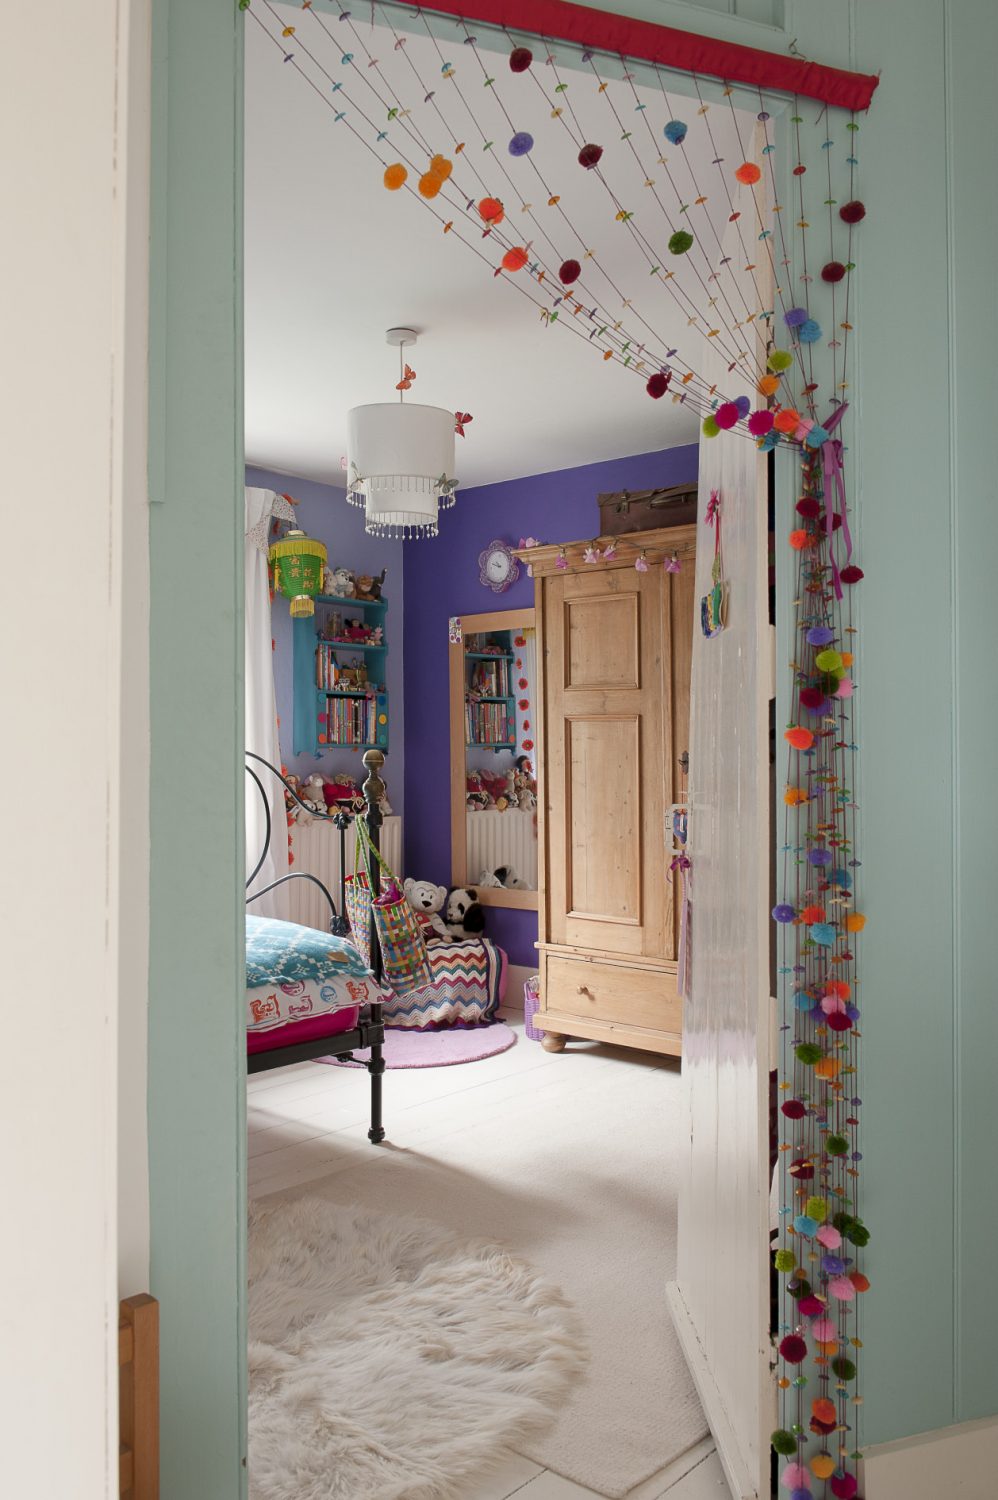 Daughter Gabrielle’s room is just as colourful as her sibling Dominic’s and features a bold floral mural on one wall